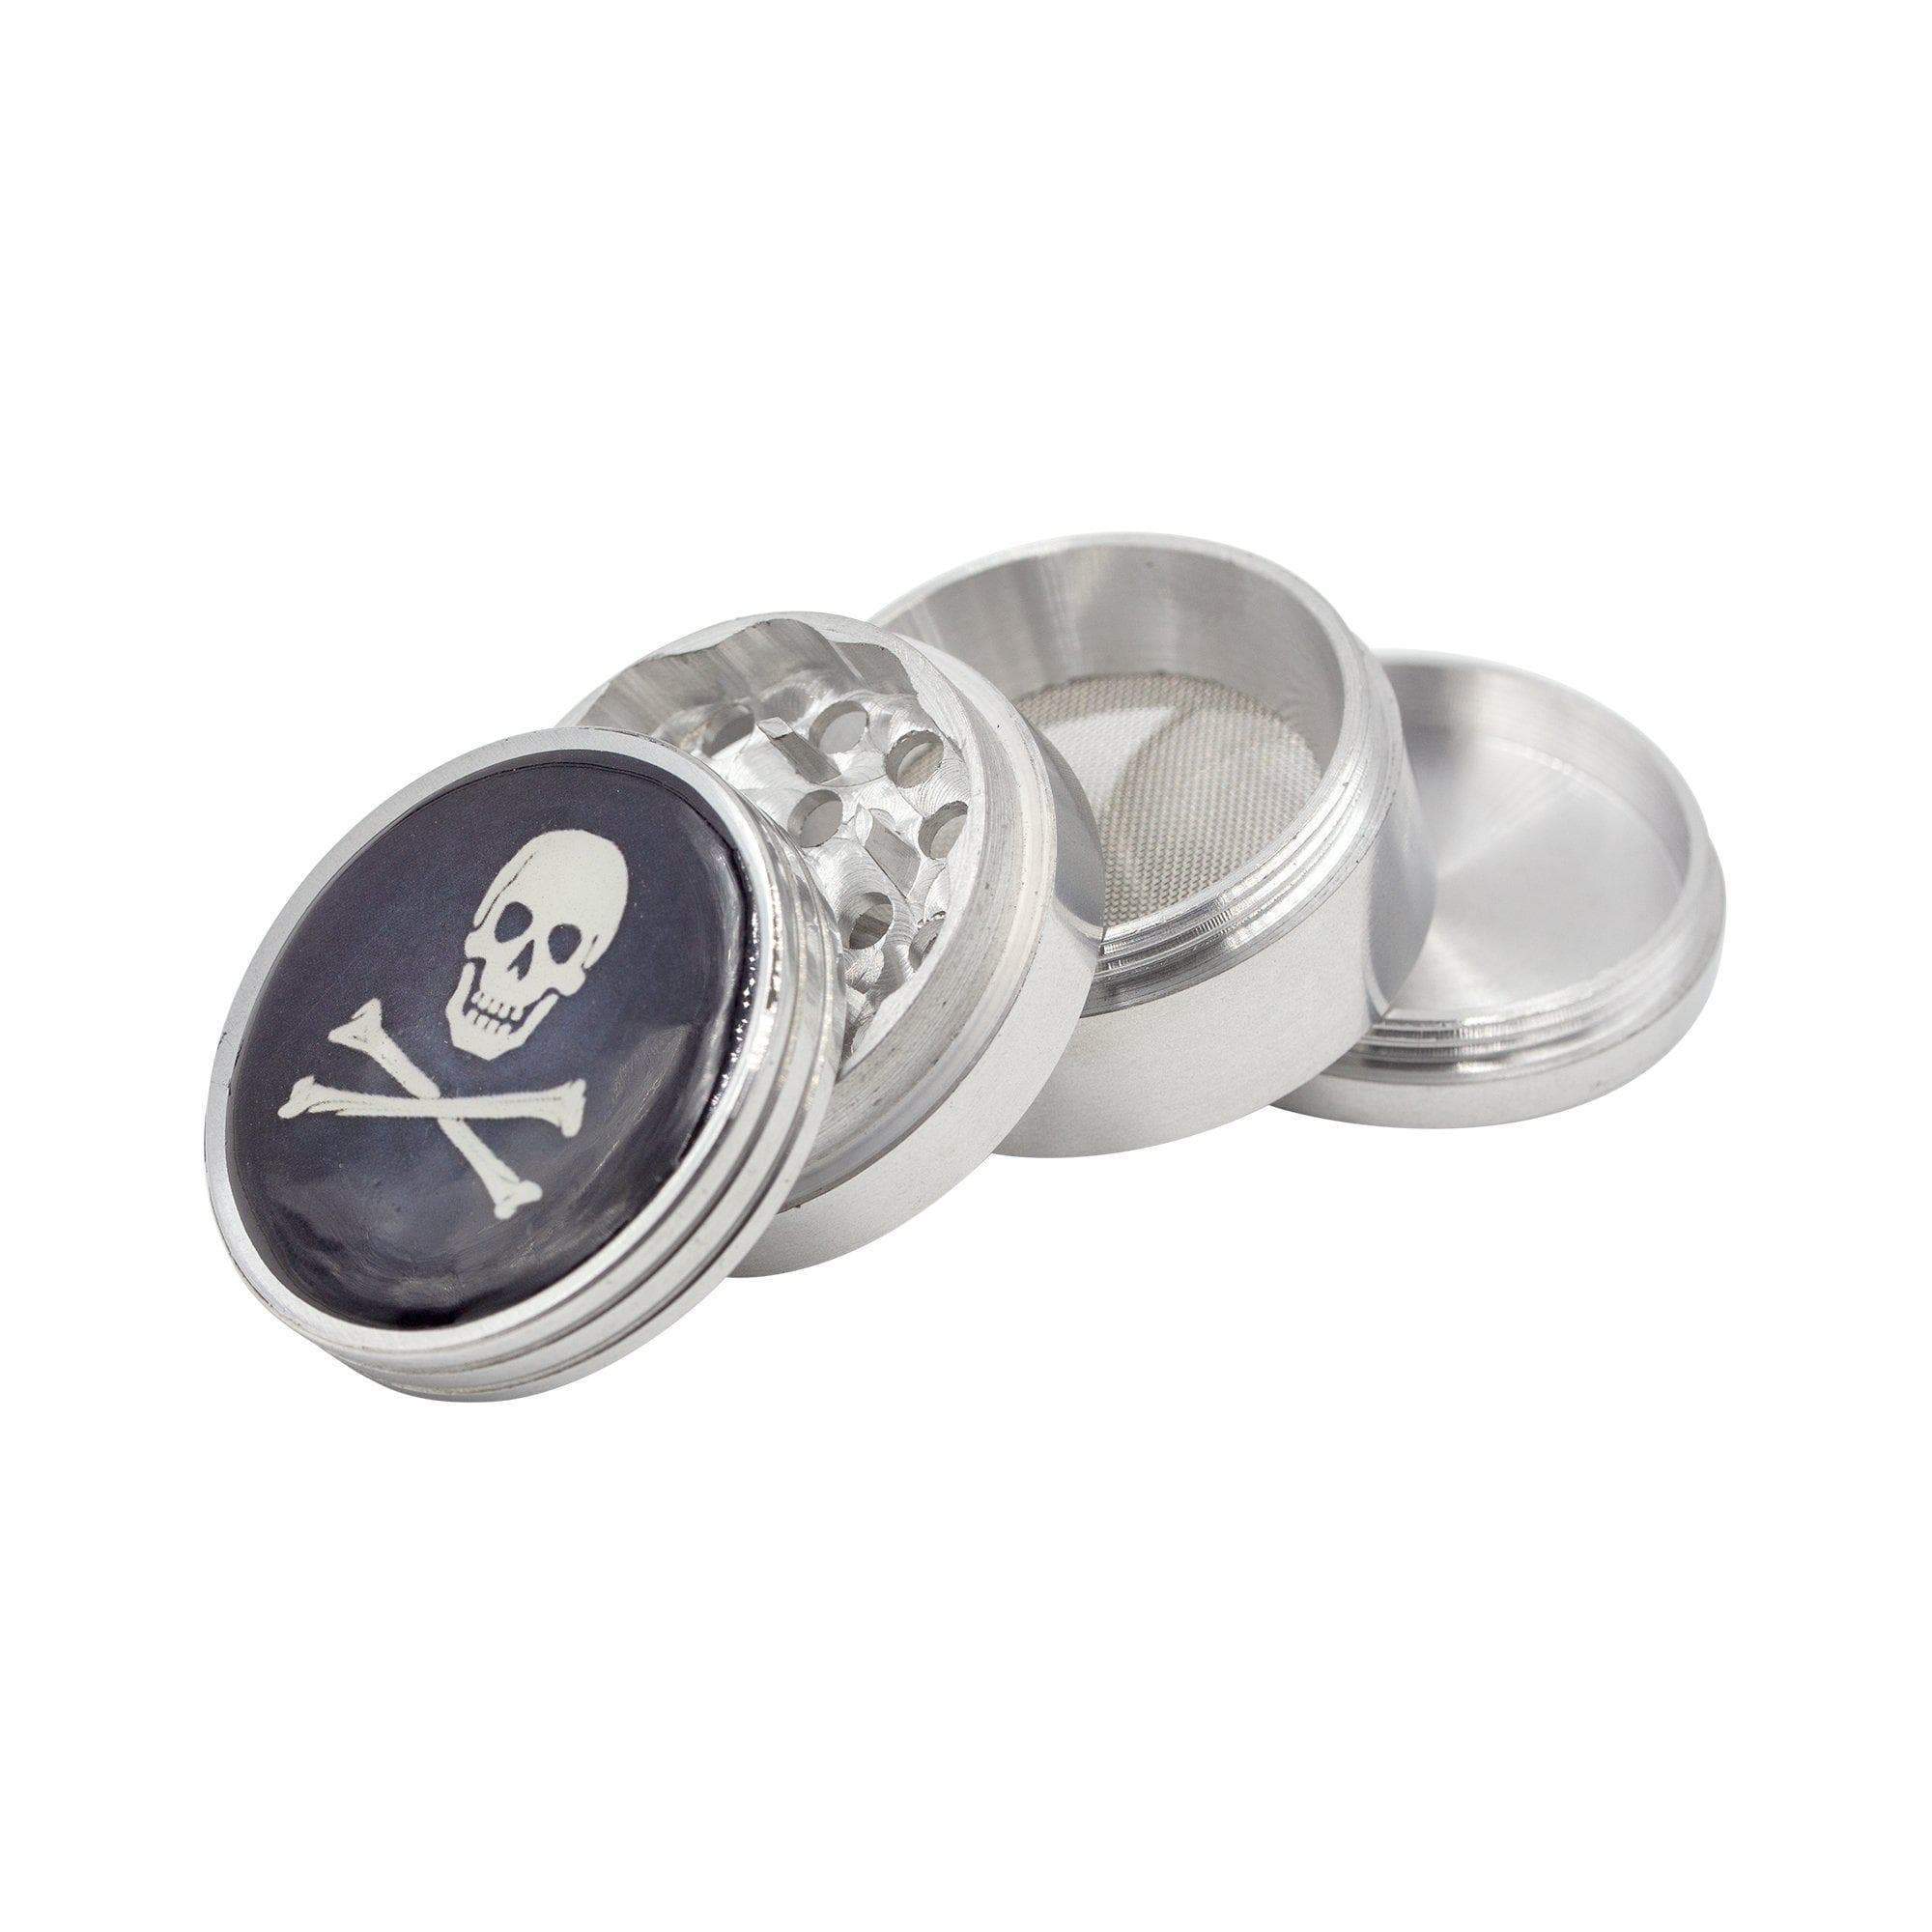 Goth metal herb grinder smoking accessory with 4 parts smooth metallic withskull and crossbones design on the lid